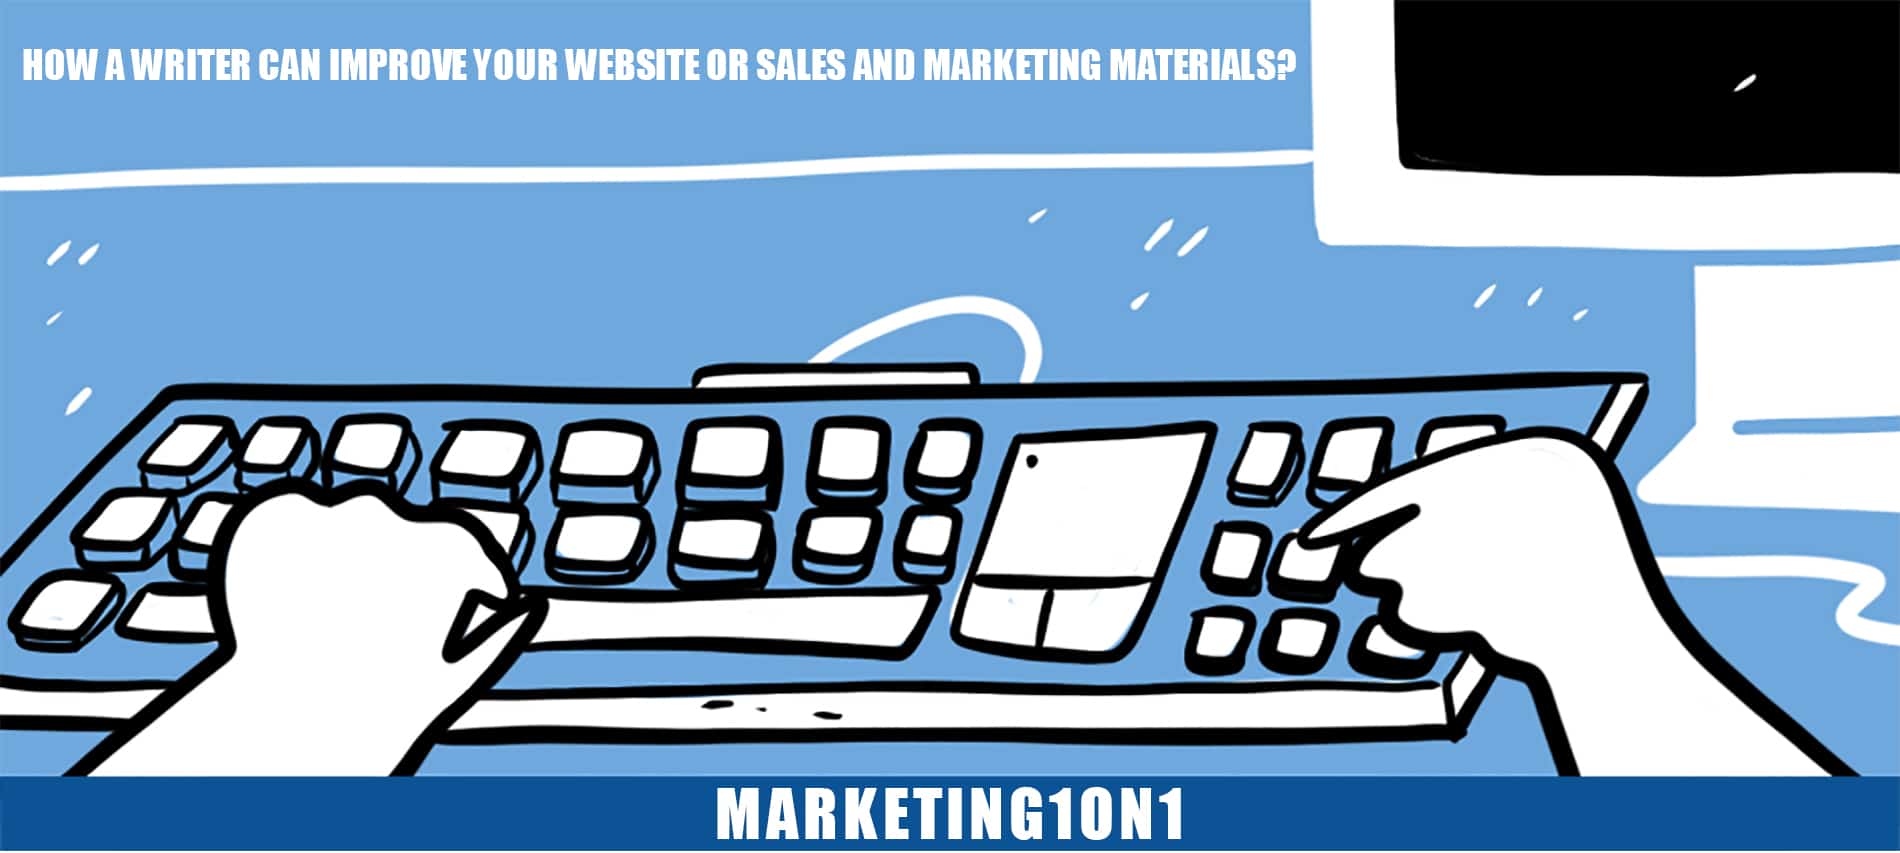 How a writer can improve your website or sales and marketing materials?